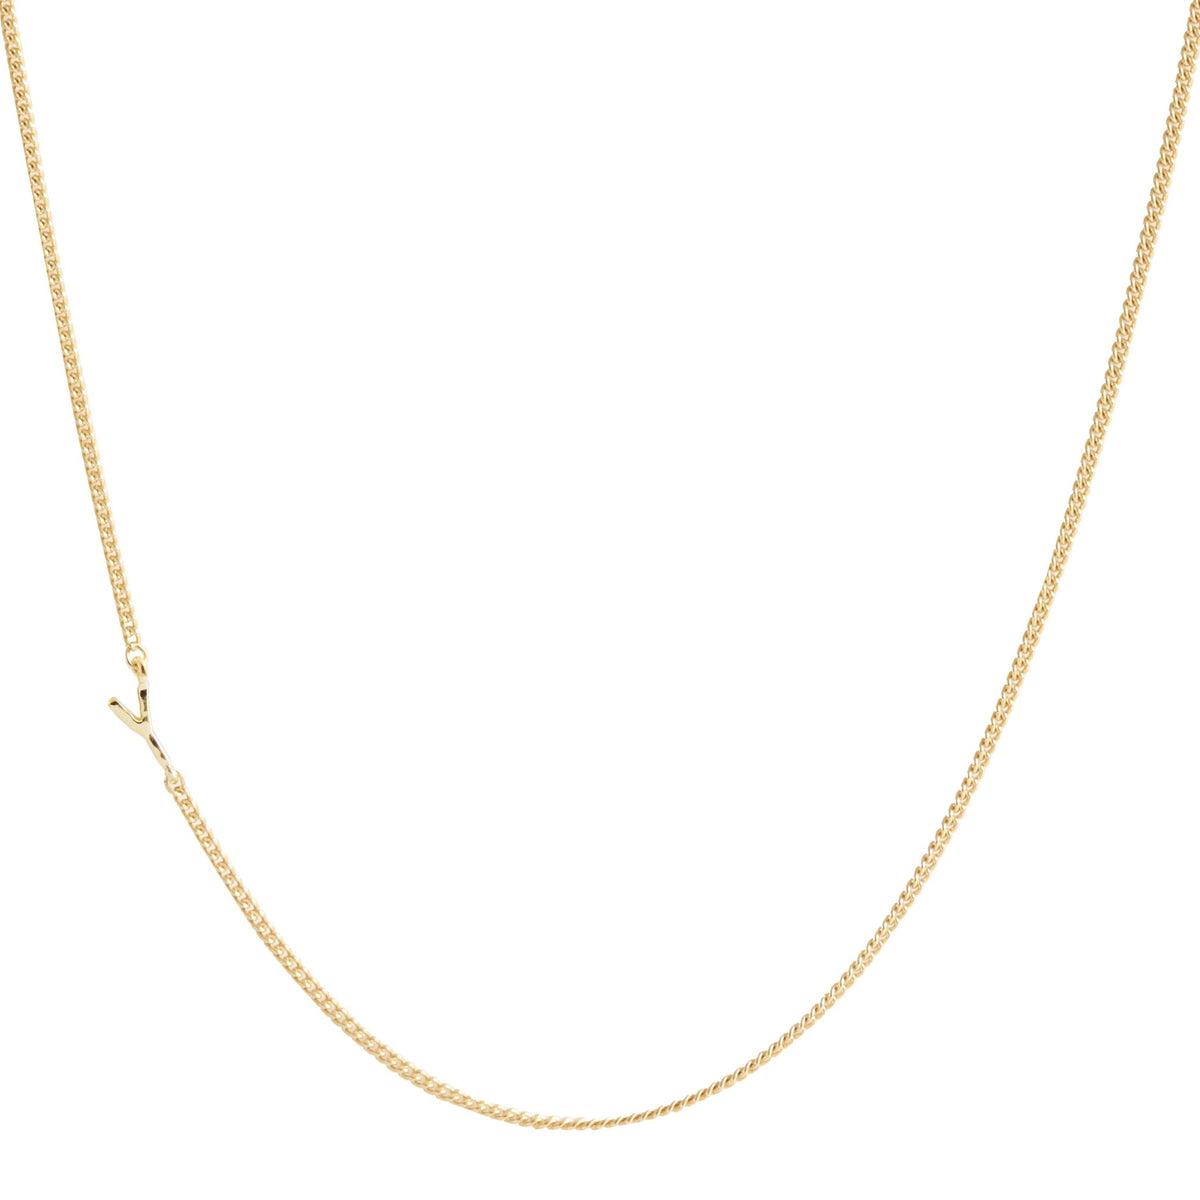 NOTABLE OFFSET INITIAL NECKLACE - Y - SO PRETTY CARA COTTER